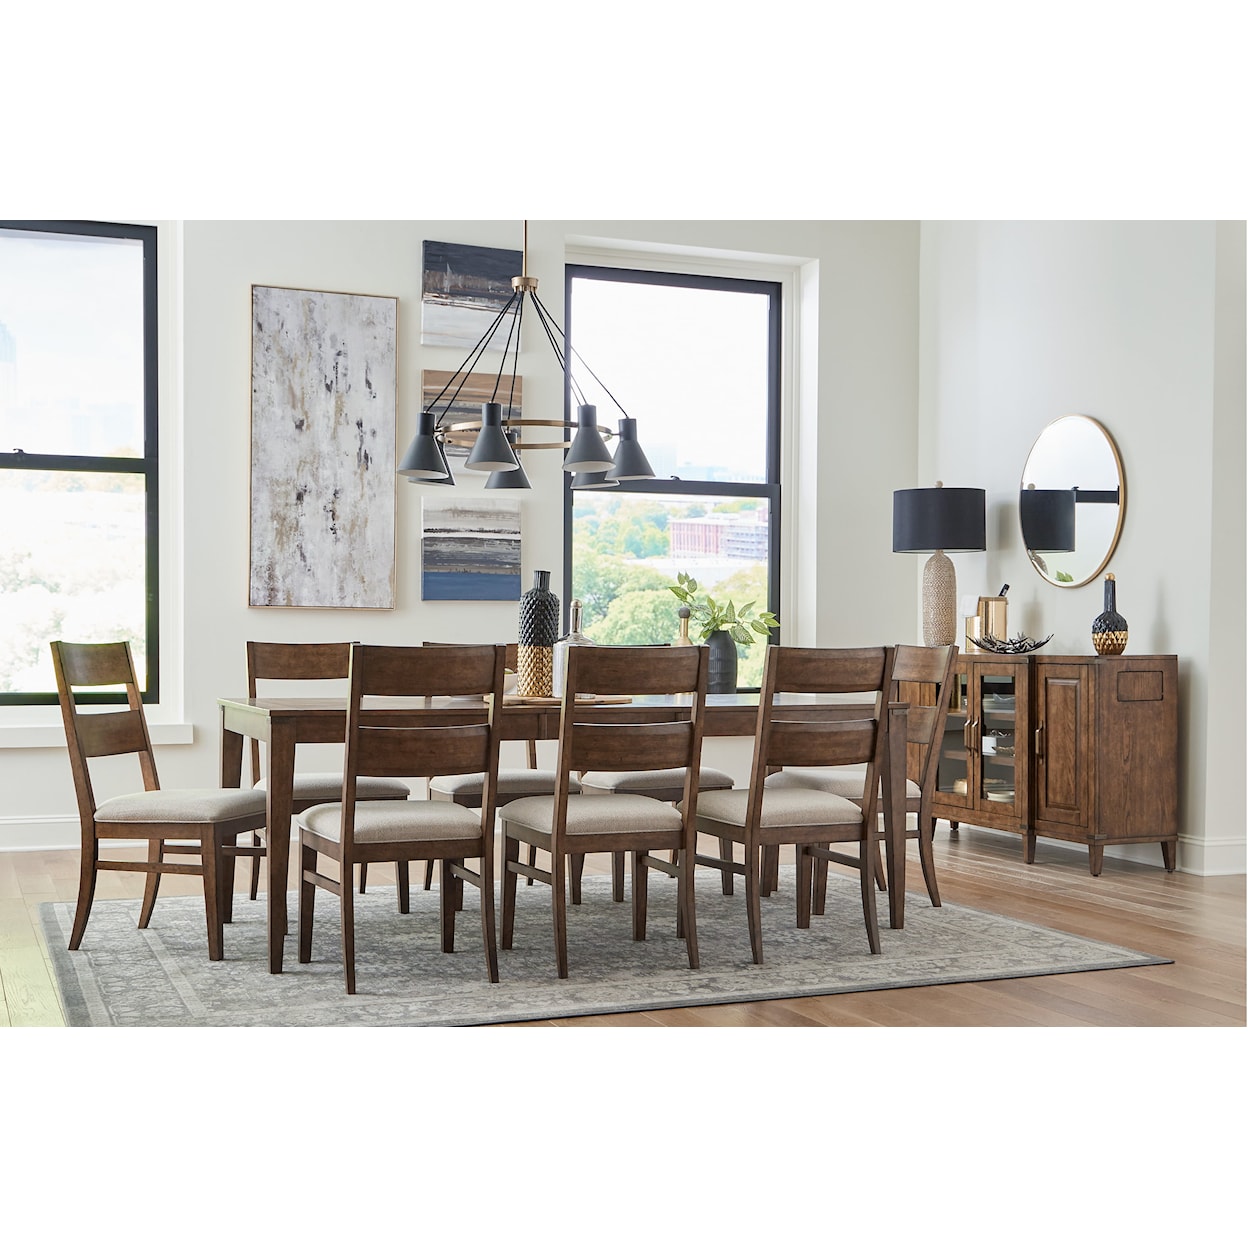 Aspenhome Asher Extendable Dining Table